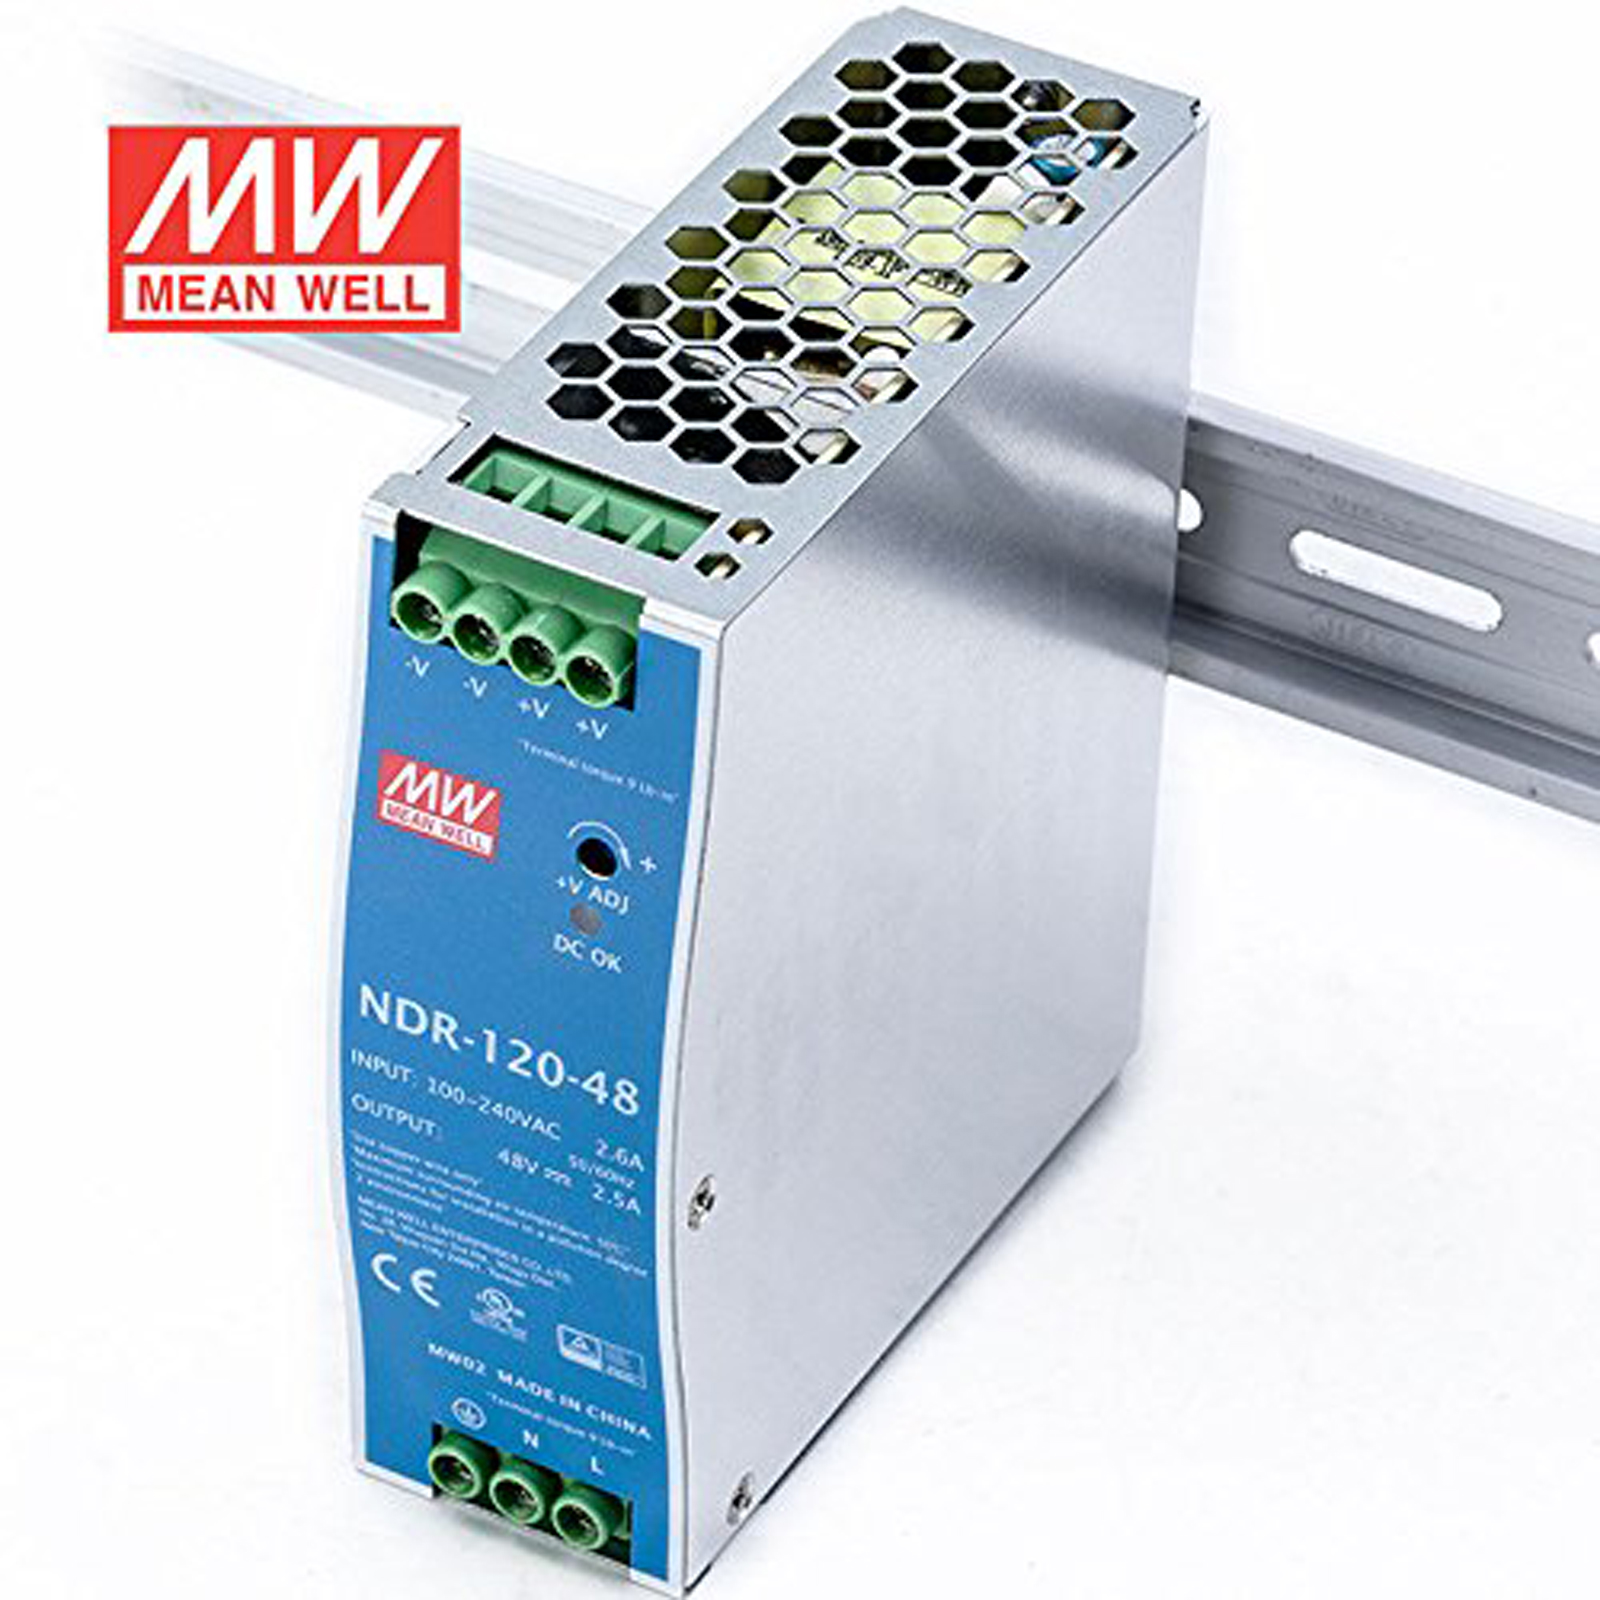 MEAN WELL 120W/48V 2.5A Industrial DIN RAIL Power Supply NDR-120-48